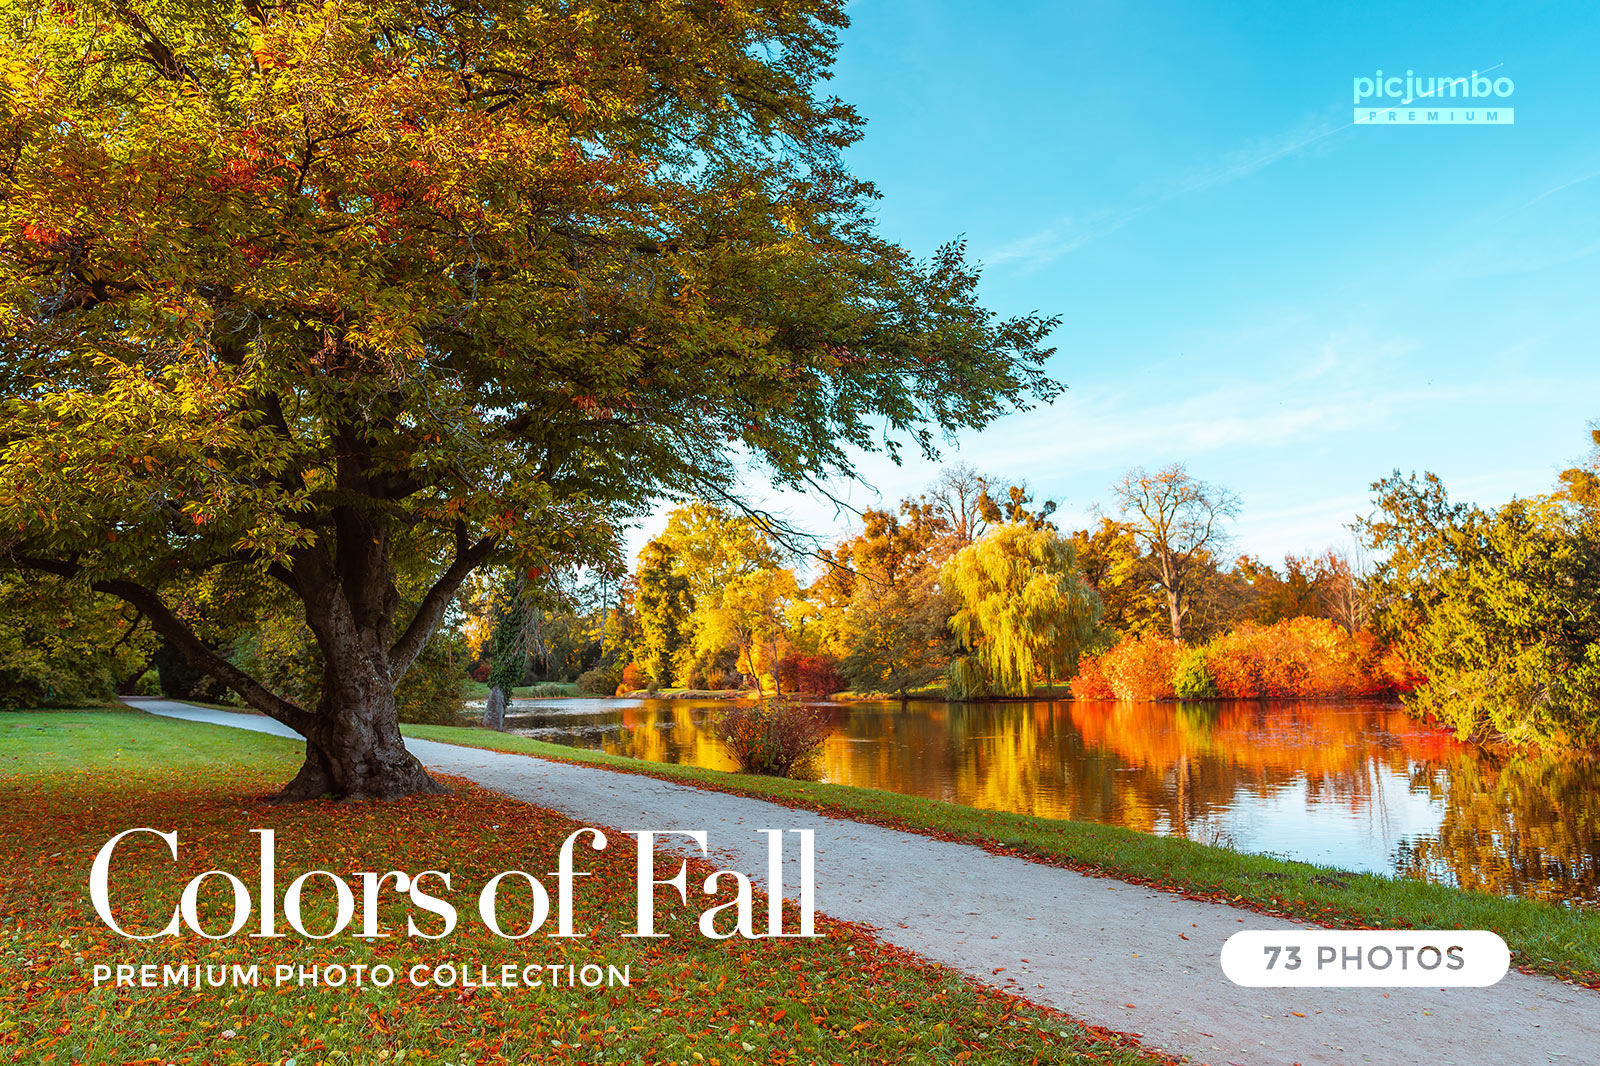 Download hi-res stock photos from our Colors of Fall PREMIUM Collection!